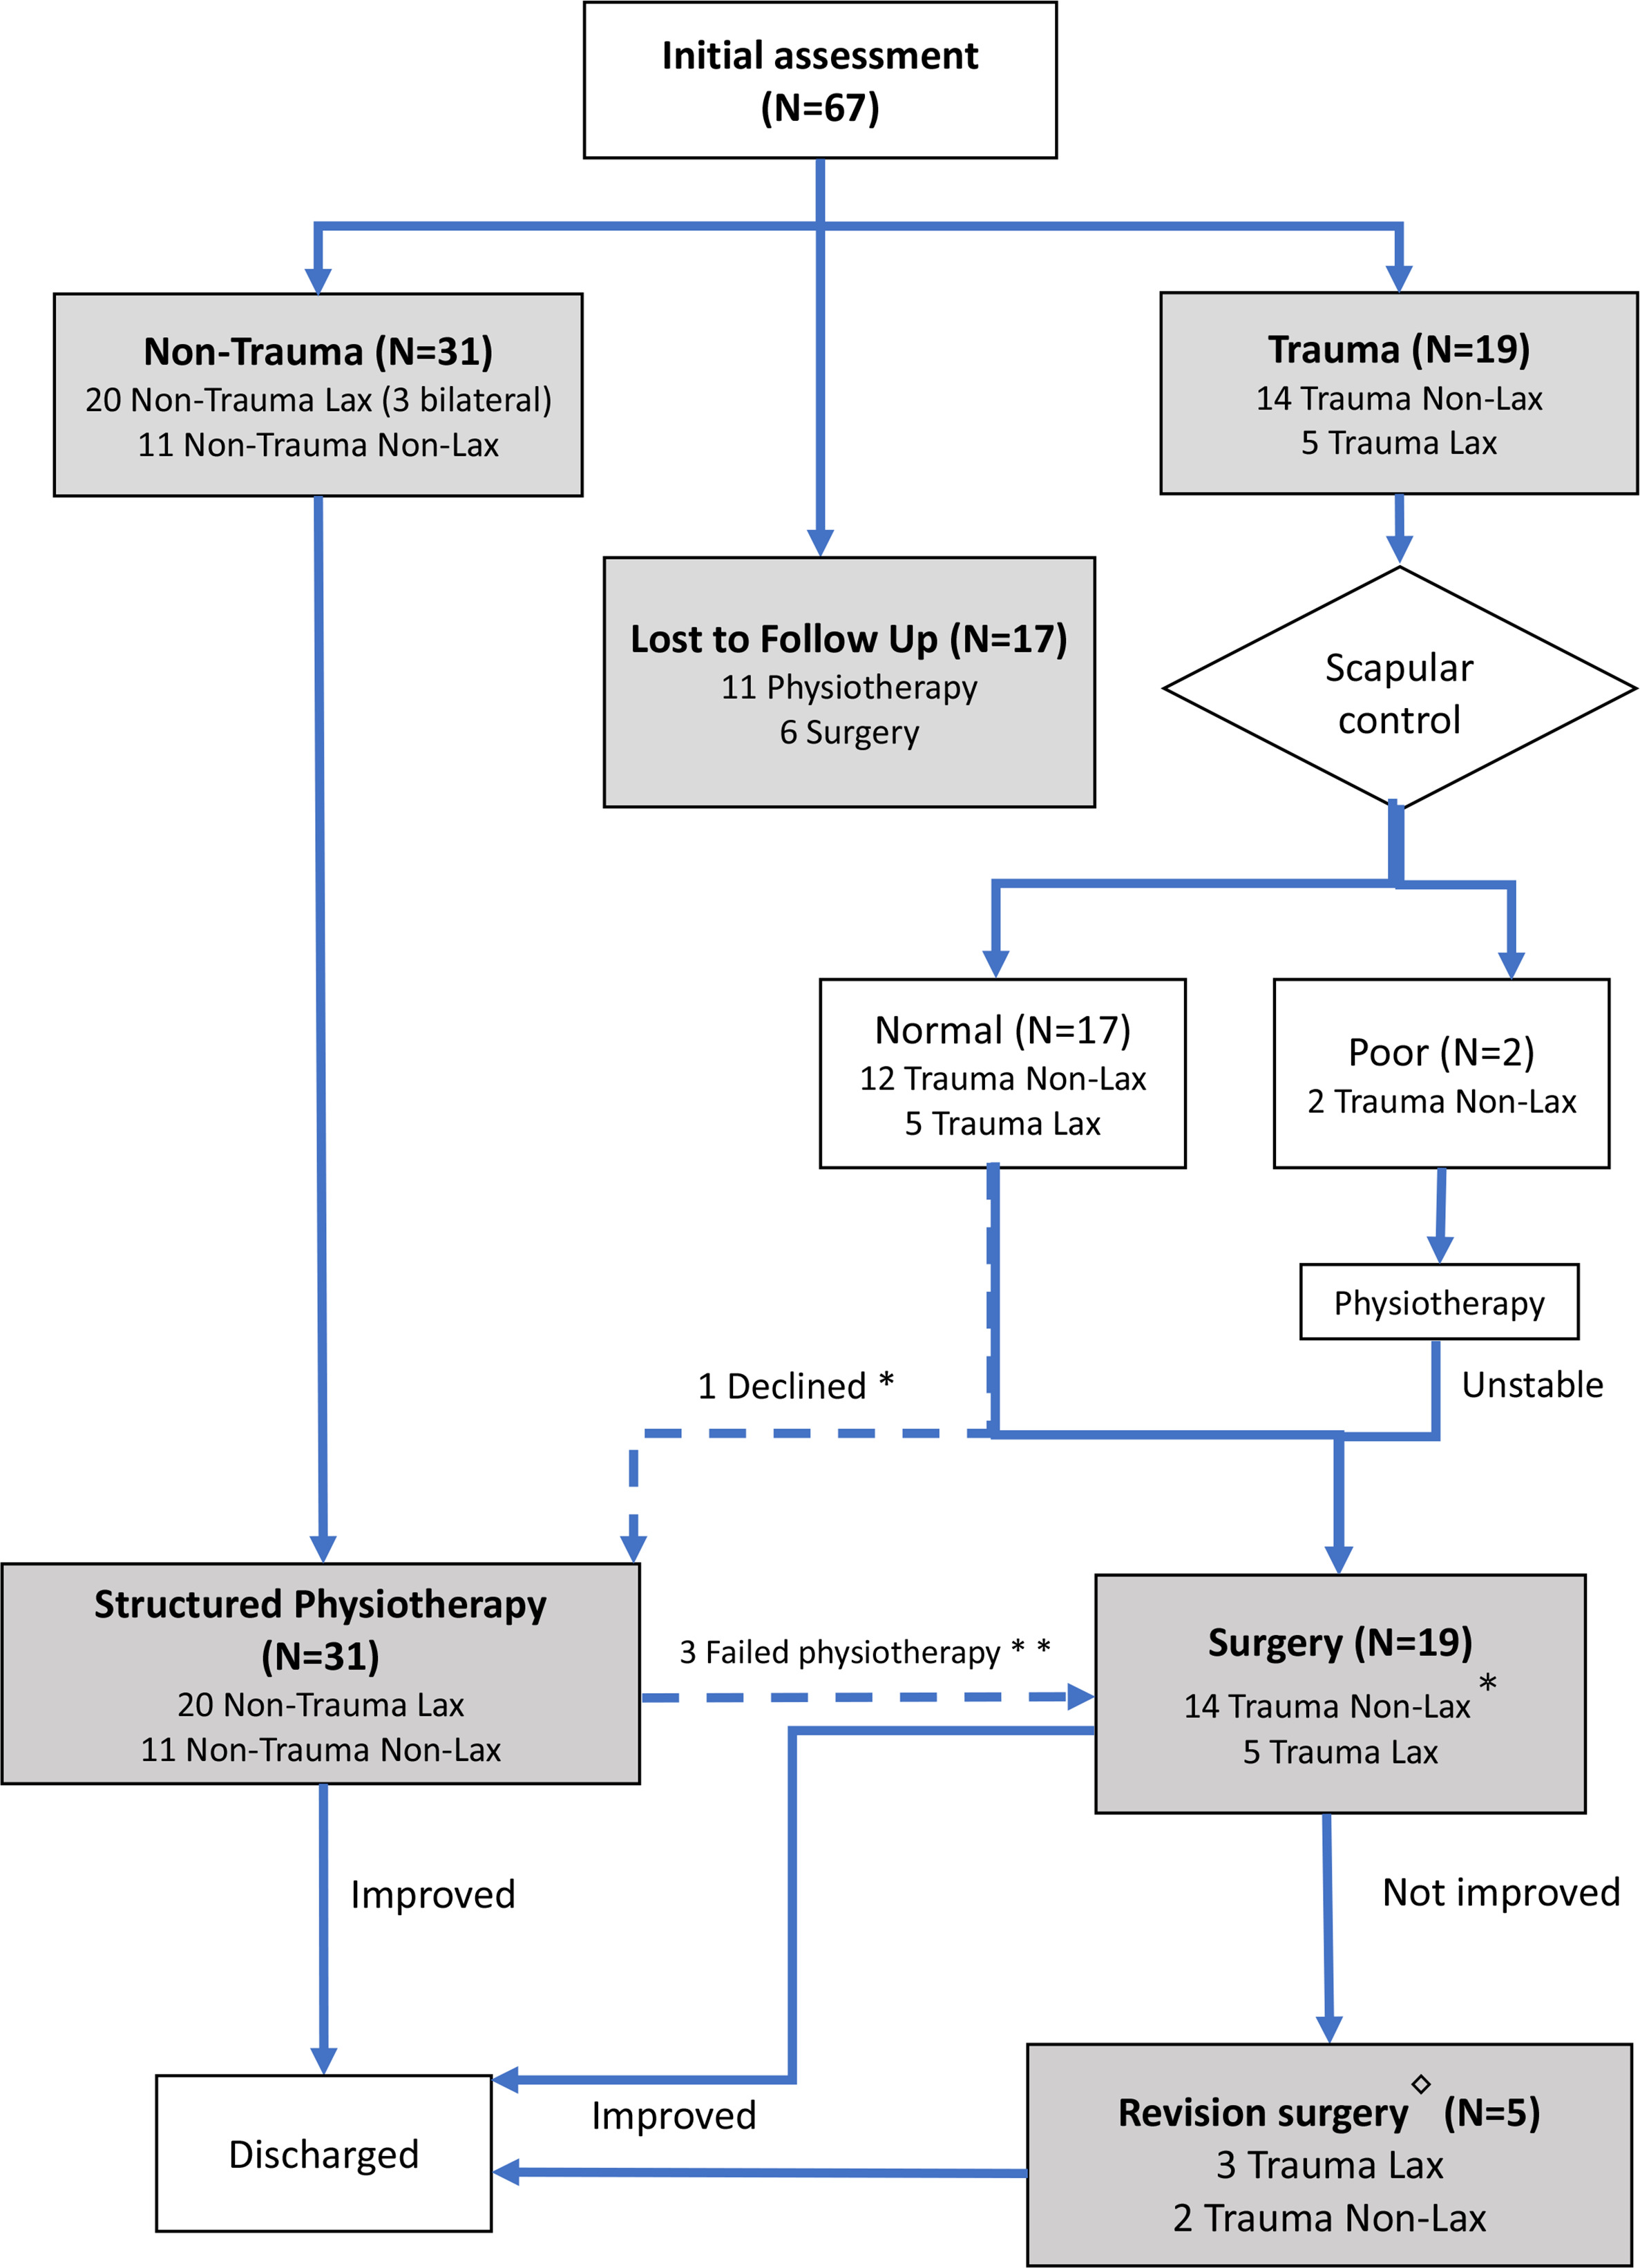 Fig. 2 
          Flow diagram for enrolled patients according to the presence or absence of trauma and joint laxity (analyzed as intention-to-treat (ITT)). Dashed lines indicate crossed over treatment (analyzed as per ITT). *One non-trauma non-lax patient declined surgery so crossed over to the physiotherapy group (analyzed as surgery group as per ITT). **Three non-trauma non-lax patients failed structured physiotherapy treatment so crossed over to the surgery group (analyzed as structured physiotherapy group as per ITT). ◇Revisions from total surgical series. Five patients were revised out of a total of 27 patients. Data were collected from four of the five patients. One of the five patients did not return the questionnaire.
        